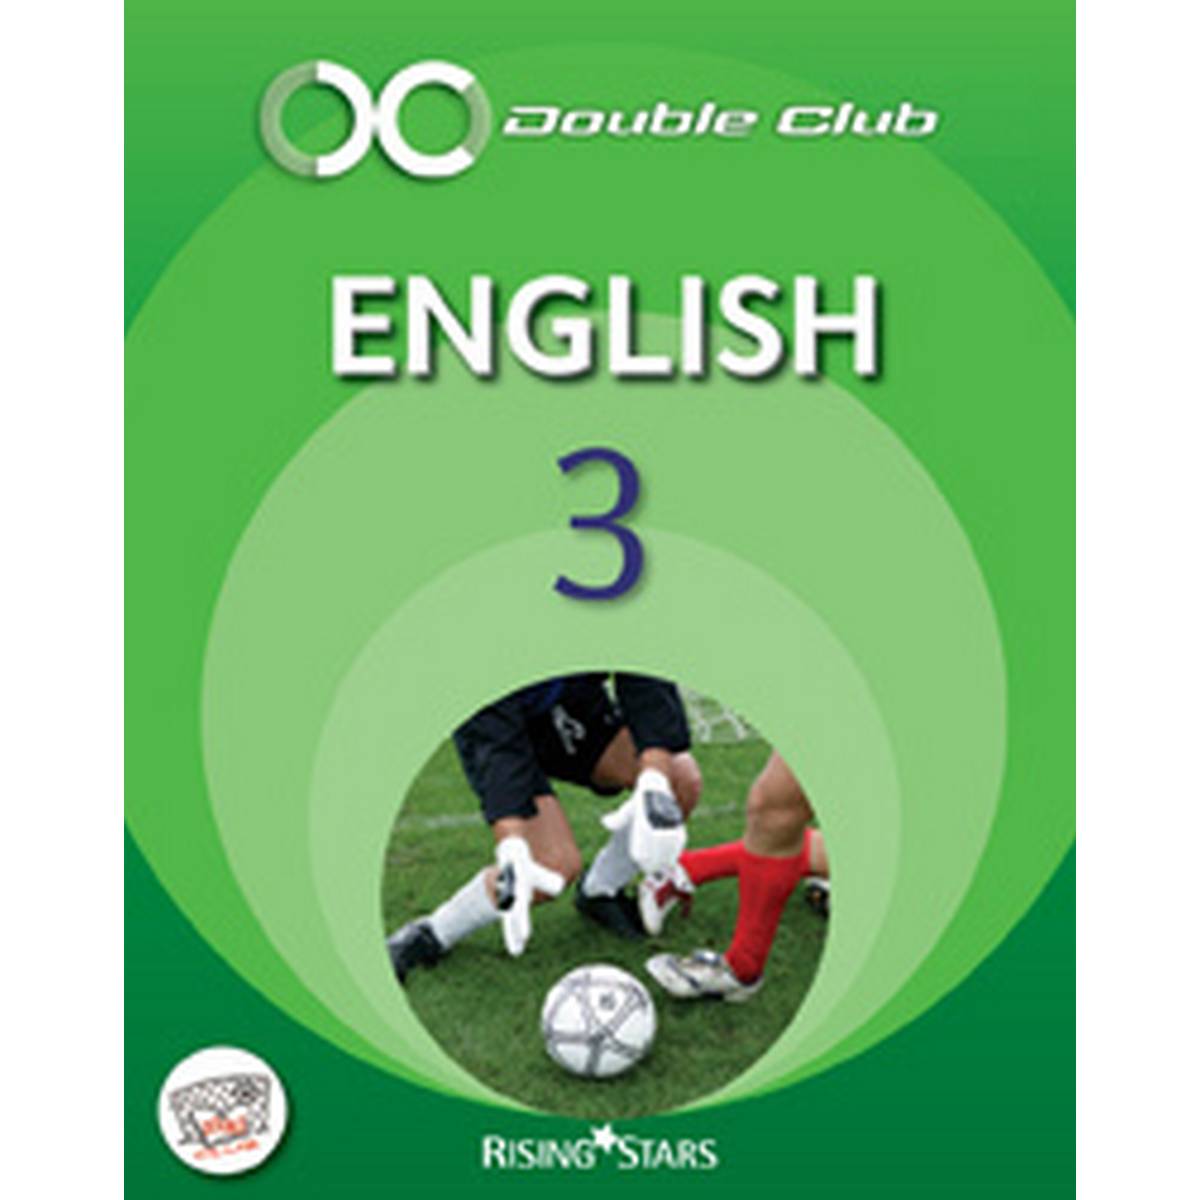 Double Club English Pupil Book 3